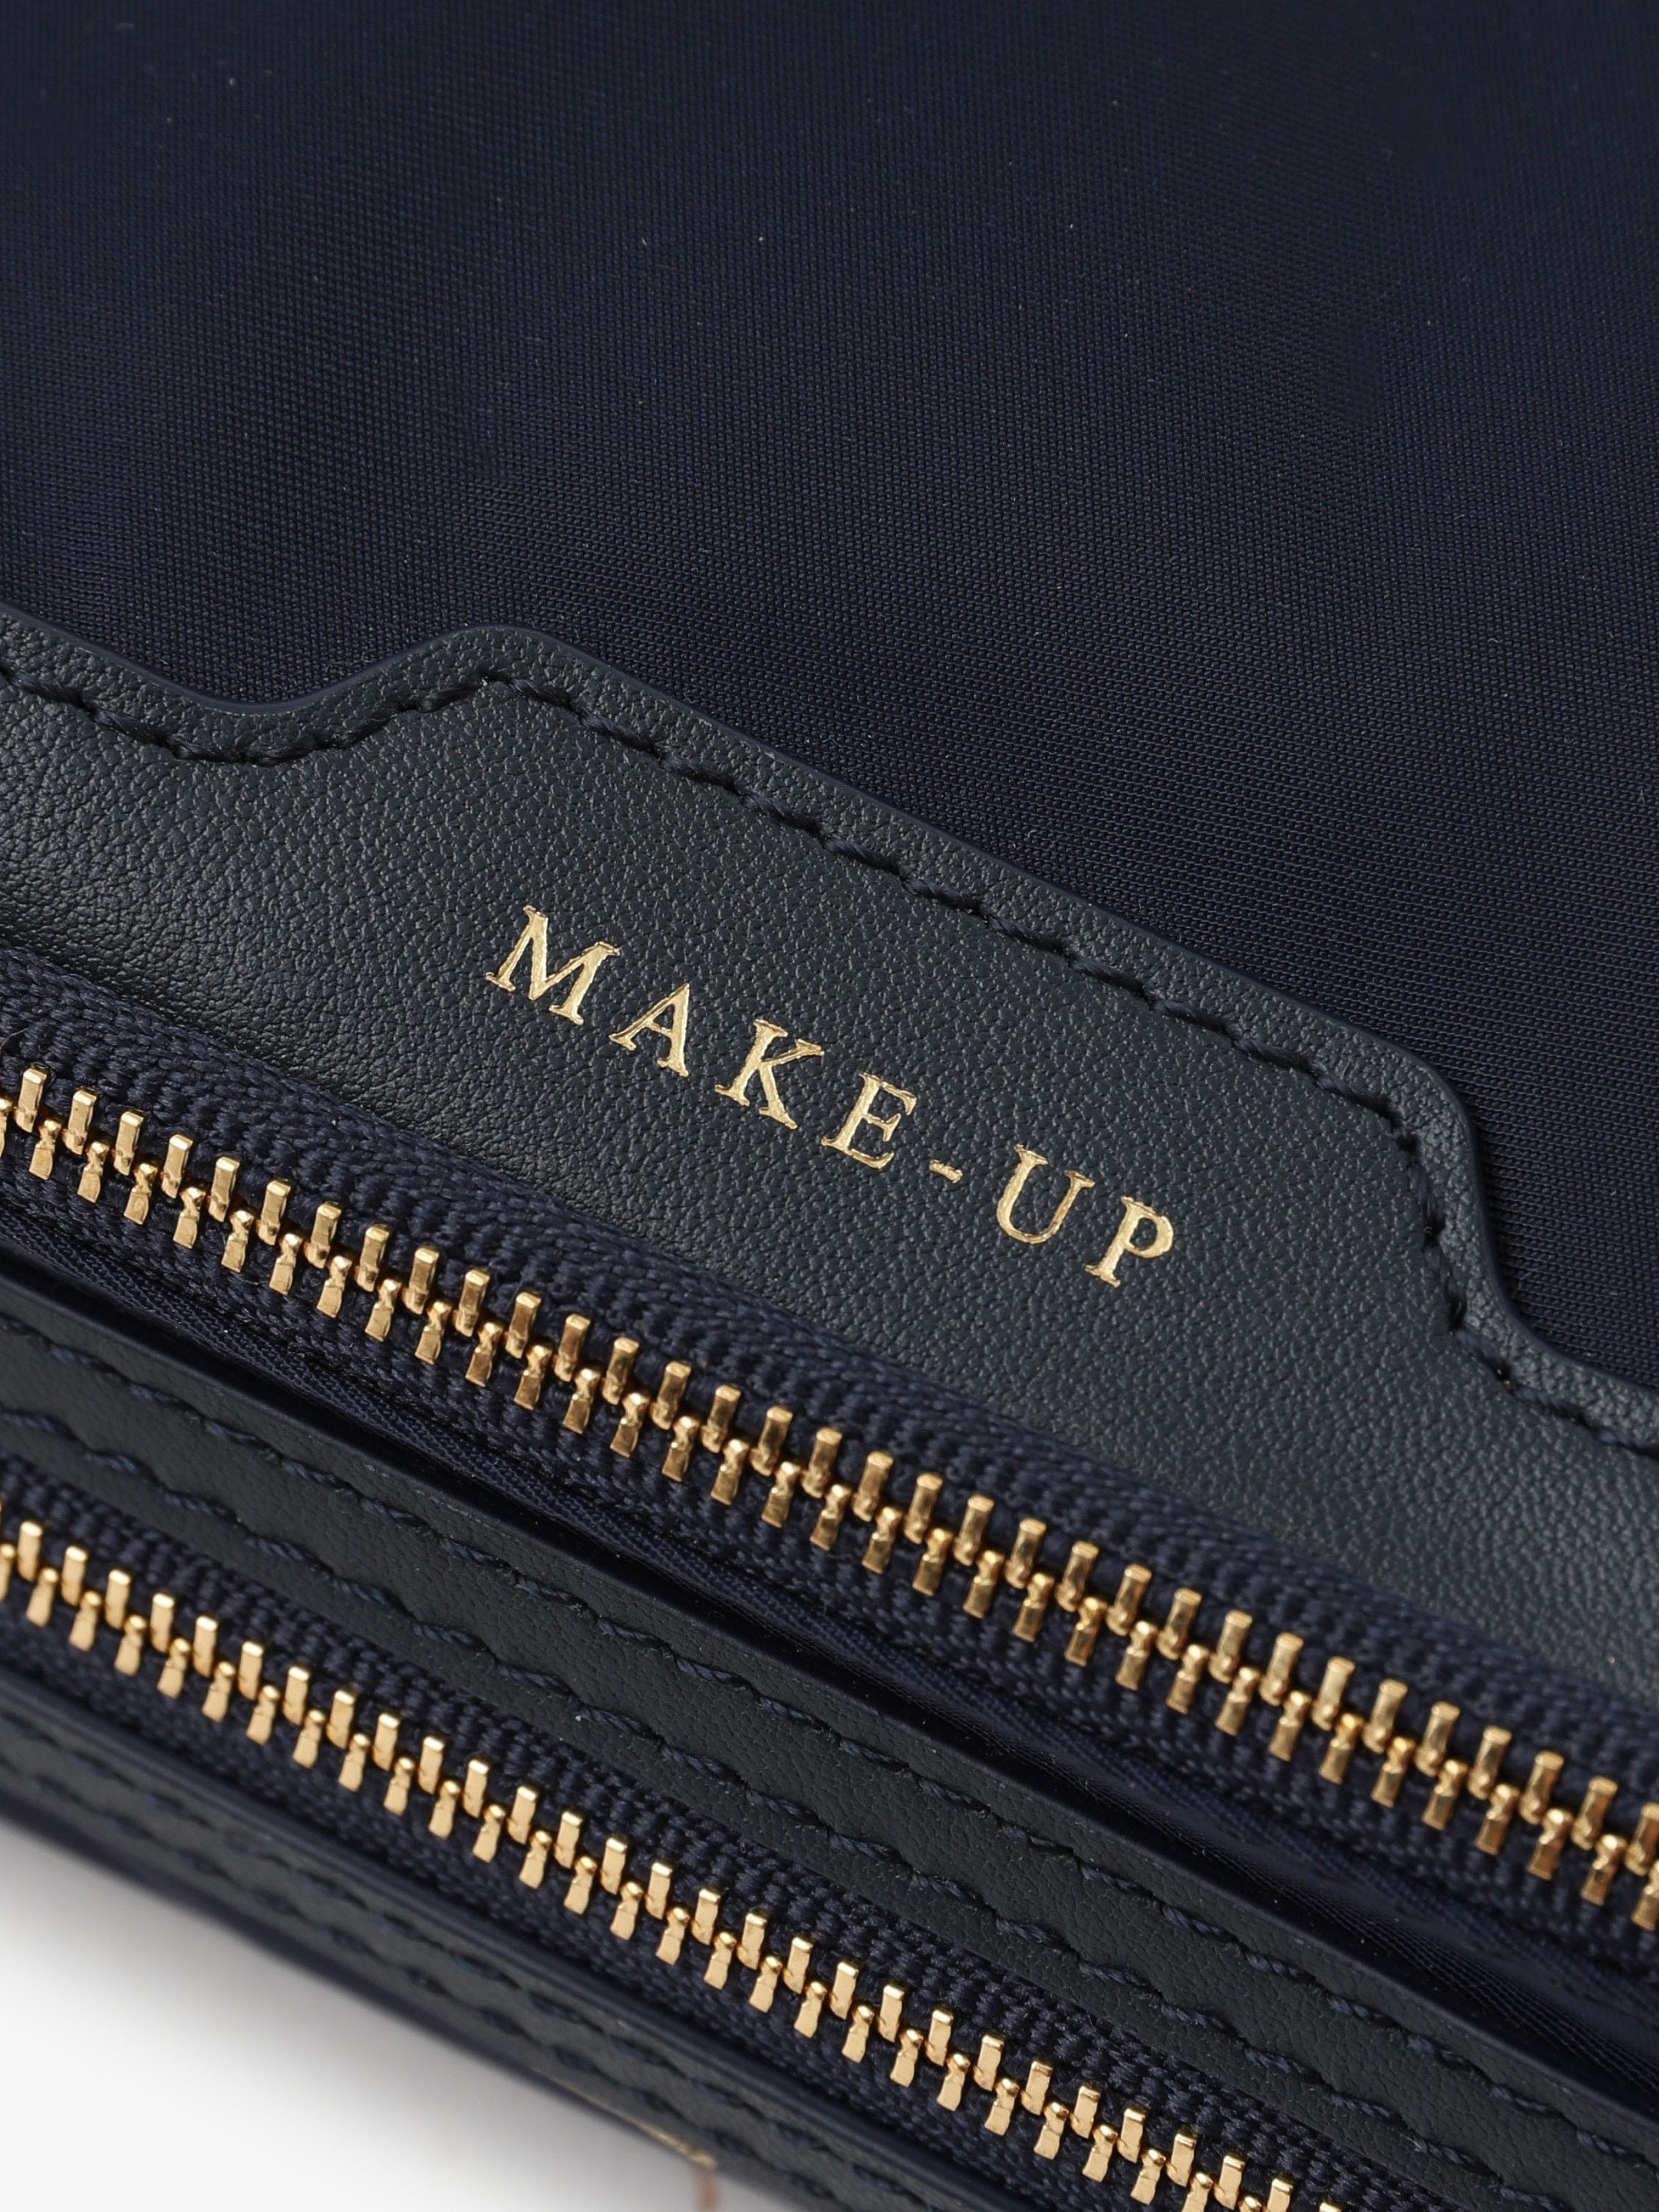 Recycled Nylon Make Up Pouch｜Anya Hindmarch(アニヤ・ハインド 